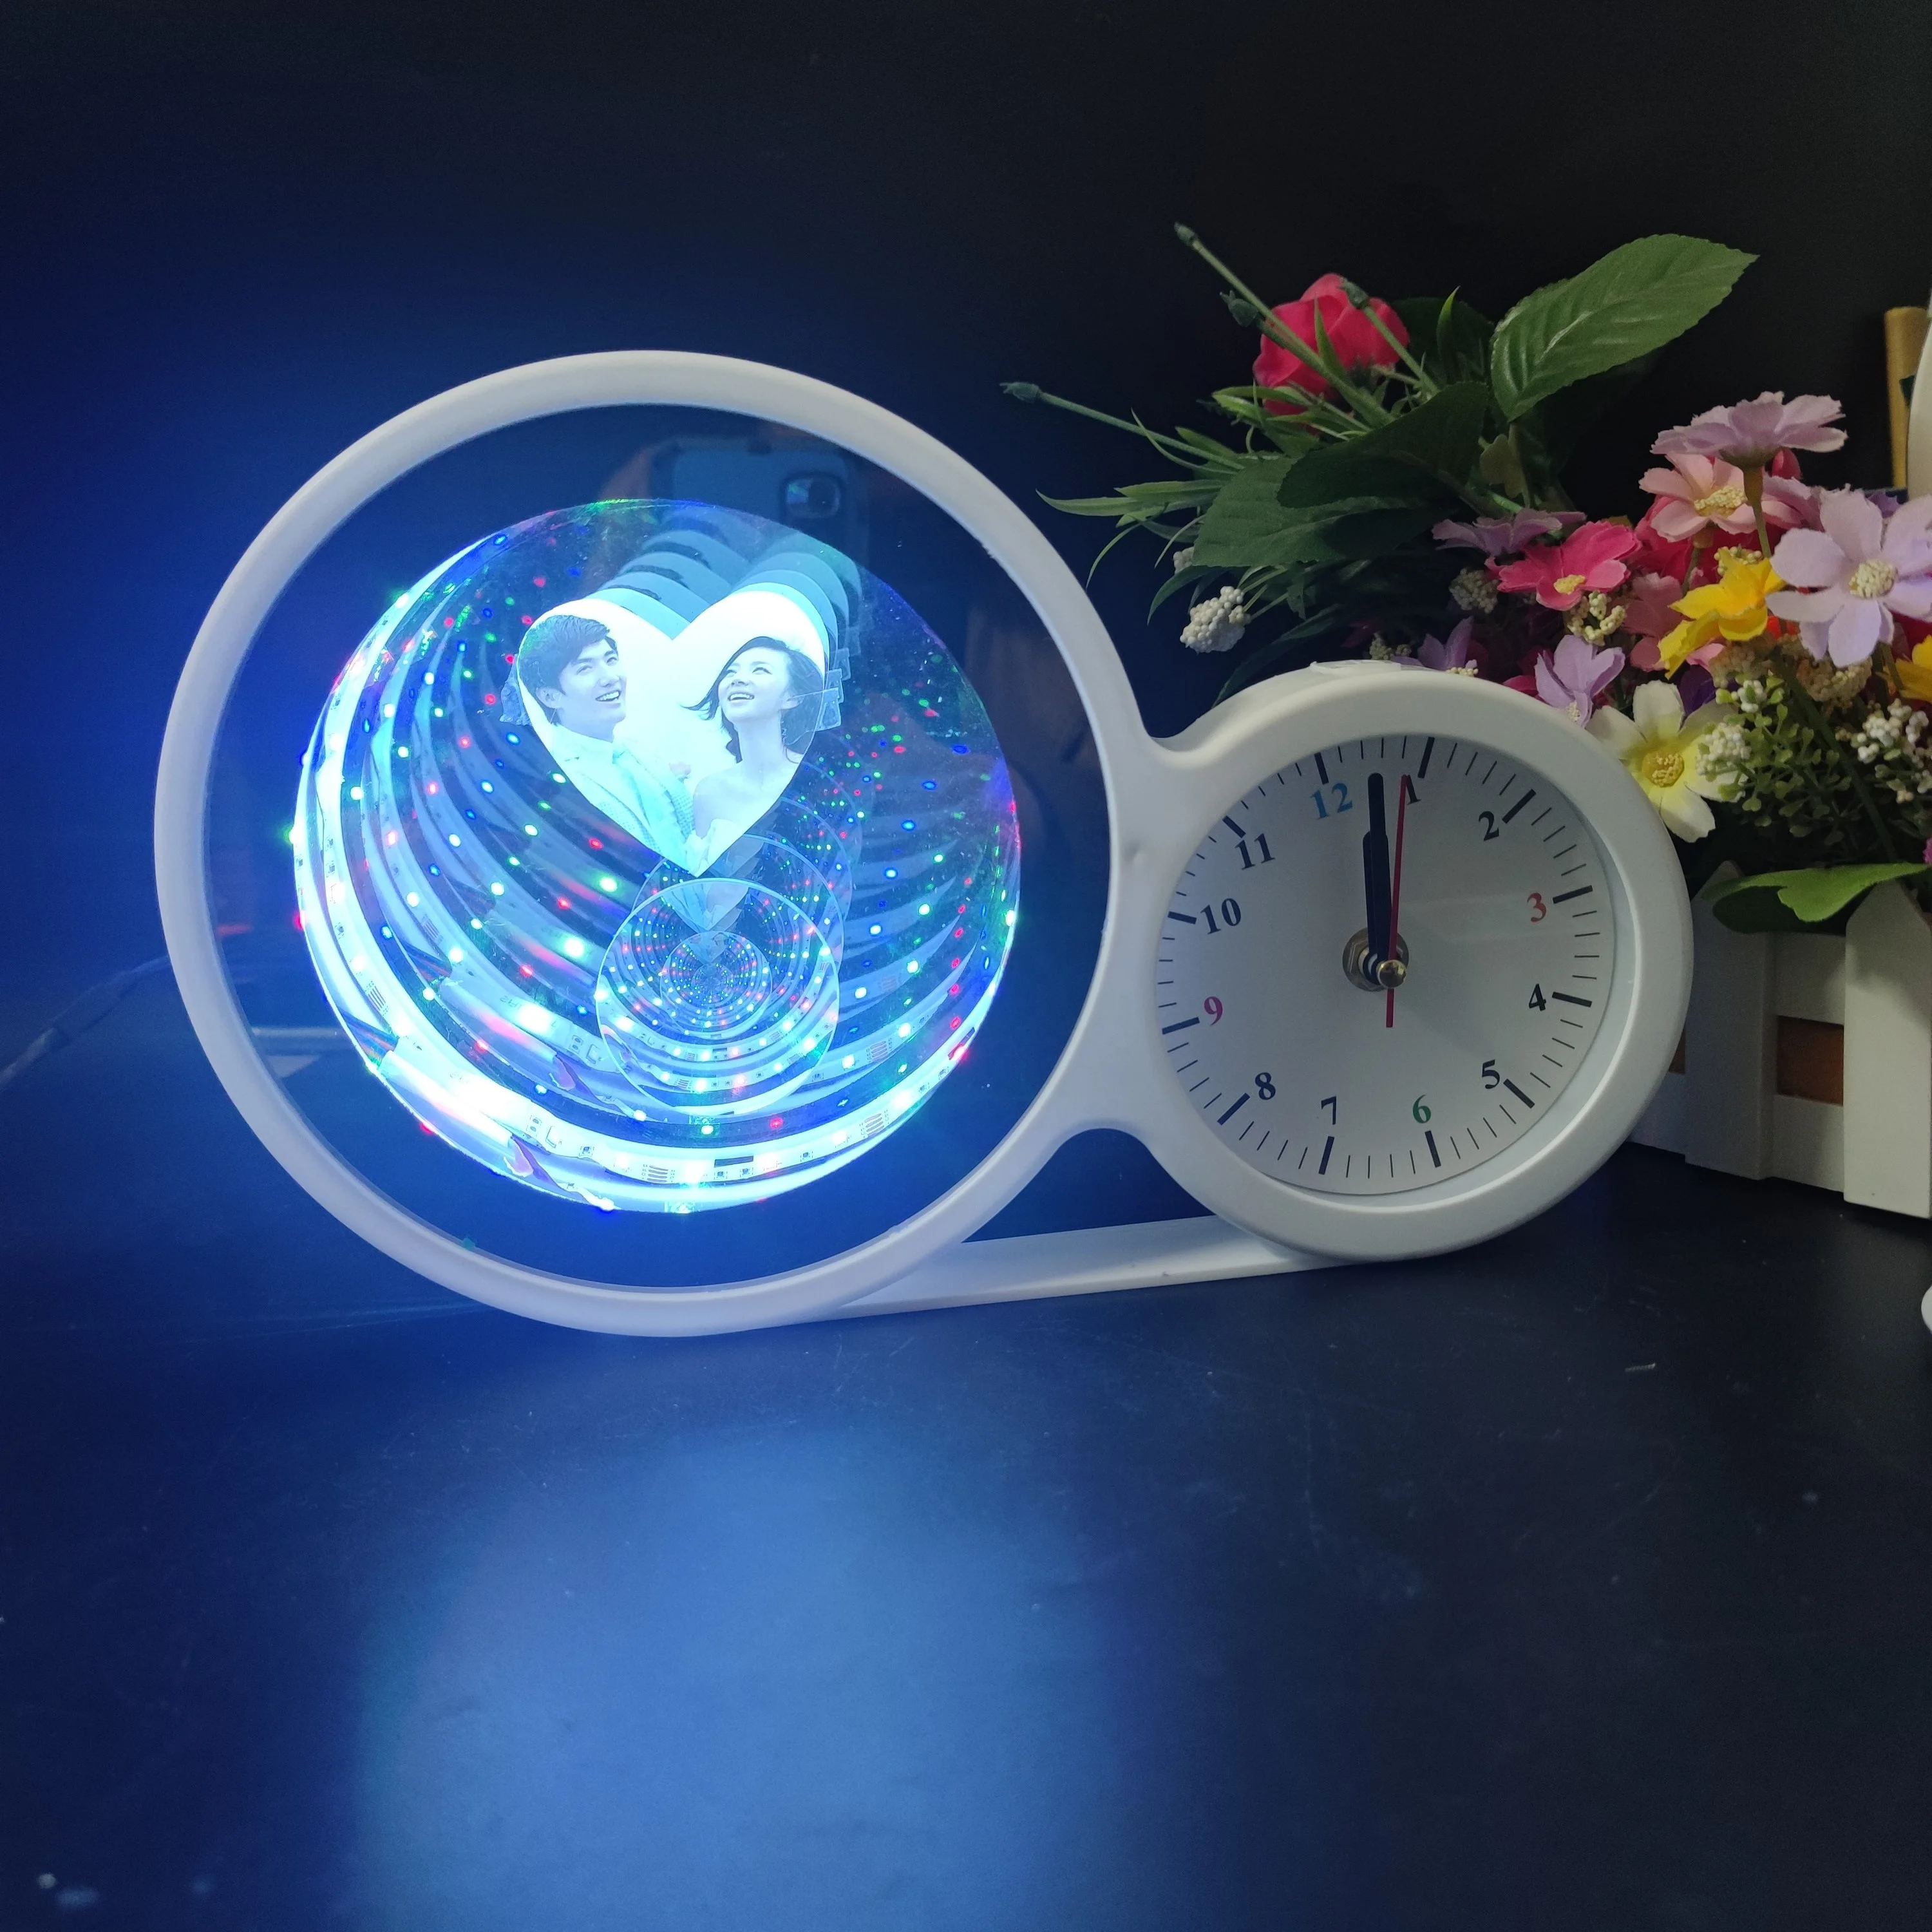 Magic Mirror led photo frame with infinity led light and clock for gifts and night light home decoration